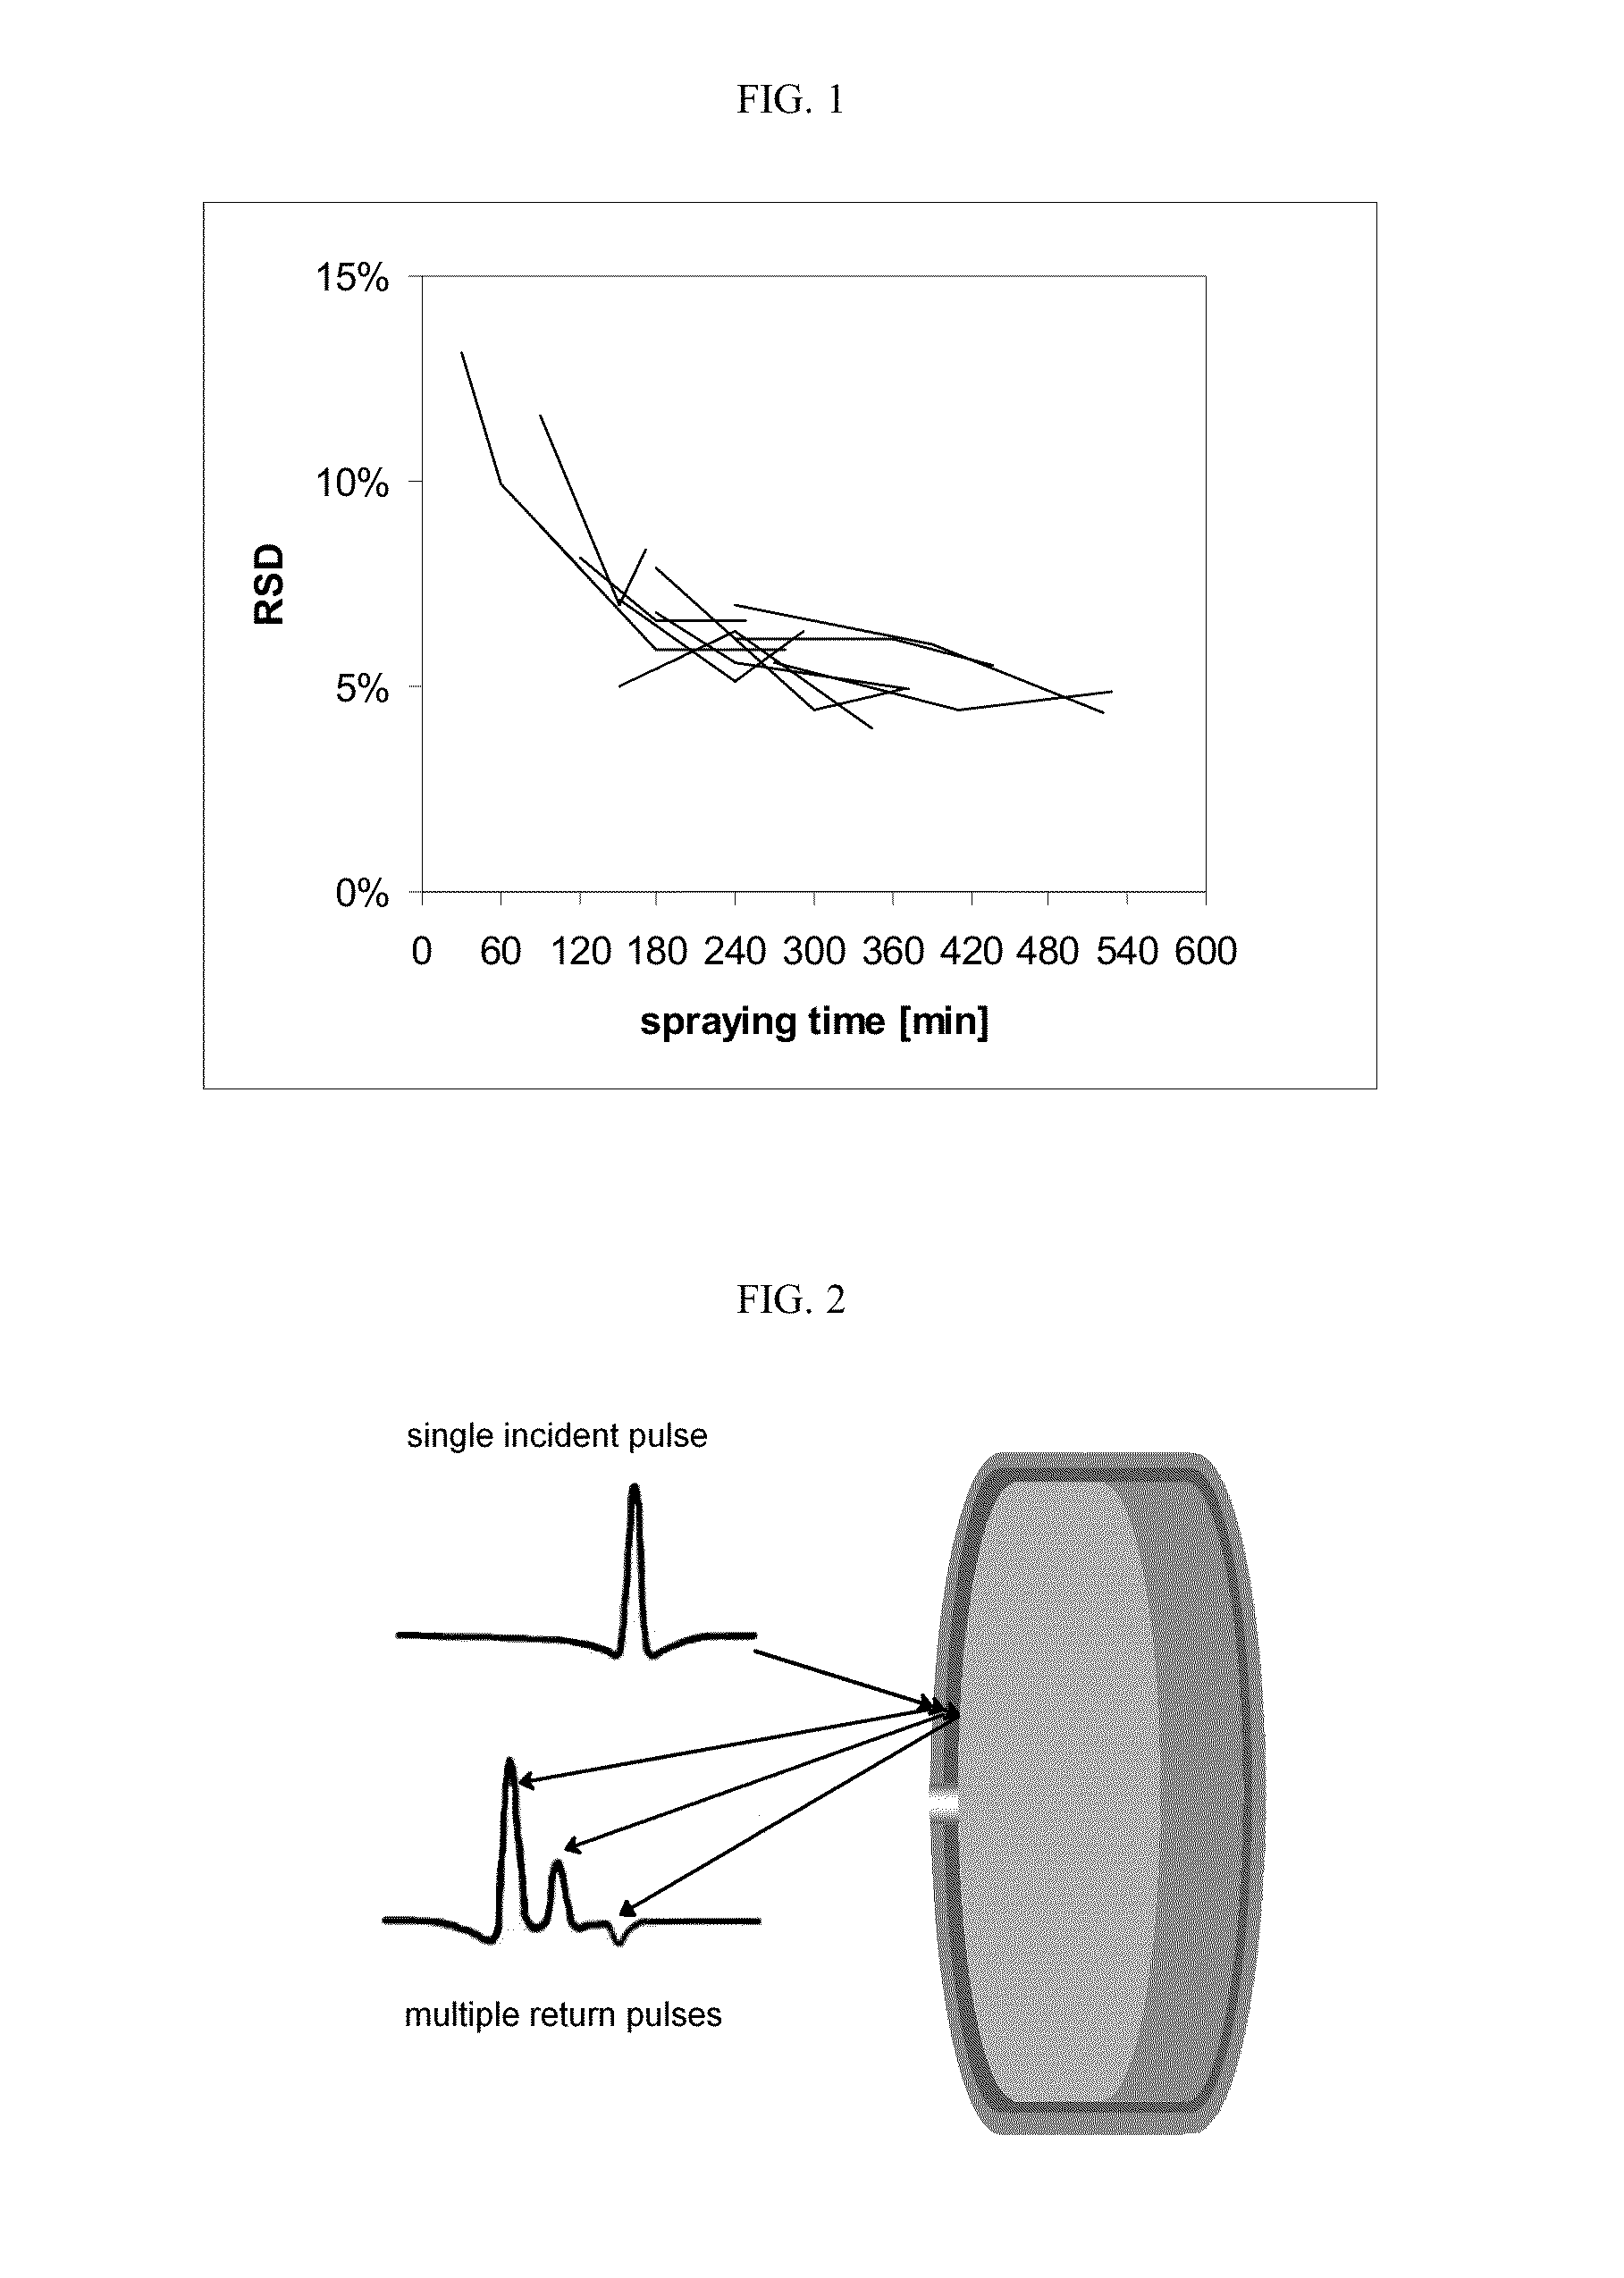 Process for manufacturing a pharmaceutical dosage form comprising nifedipine and candesartan cilexetil